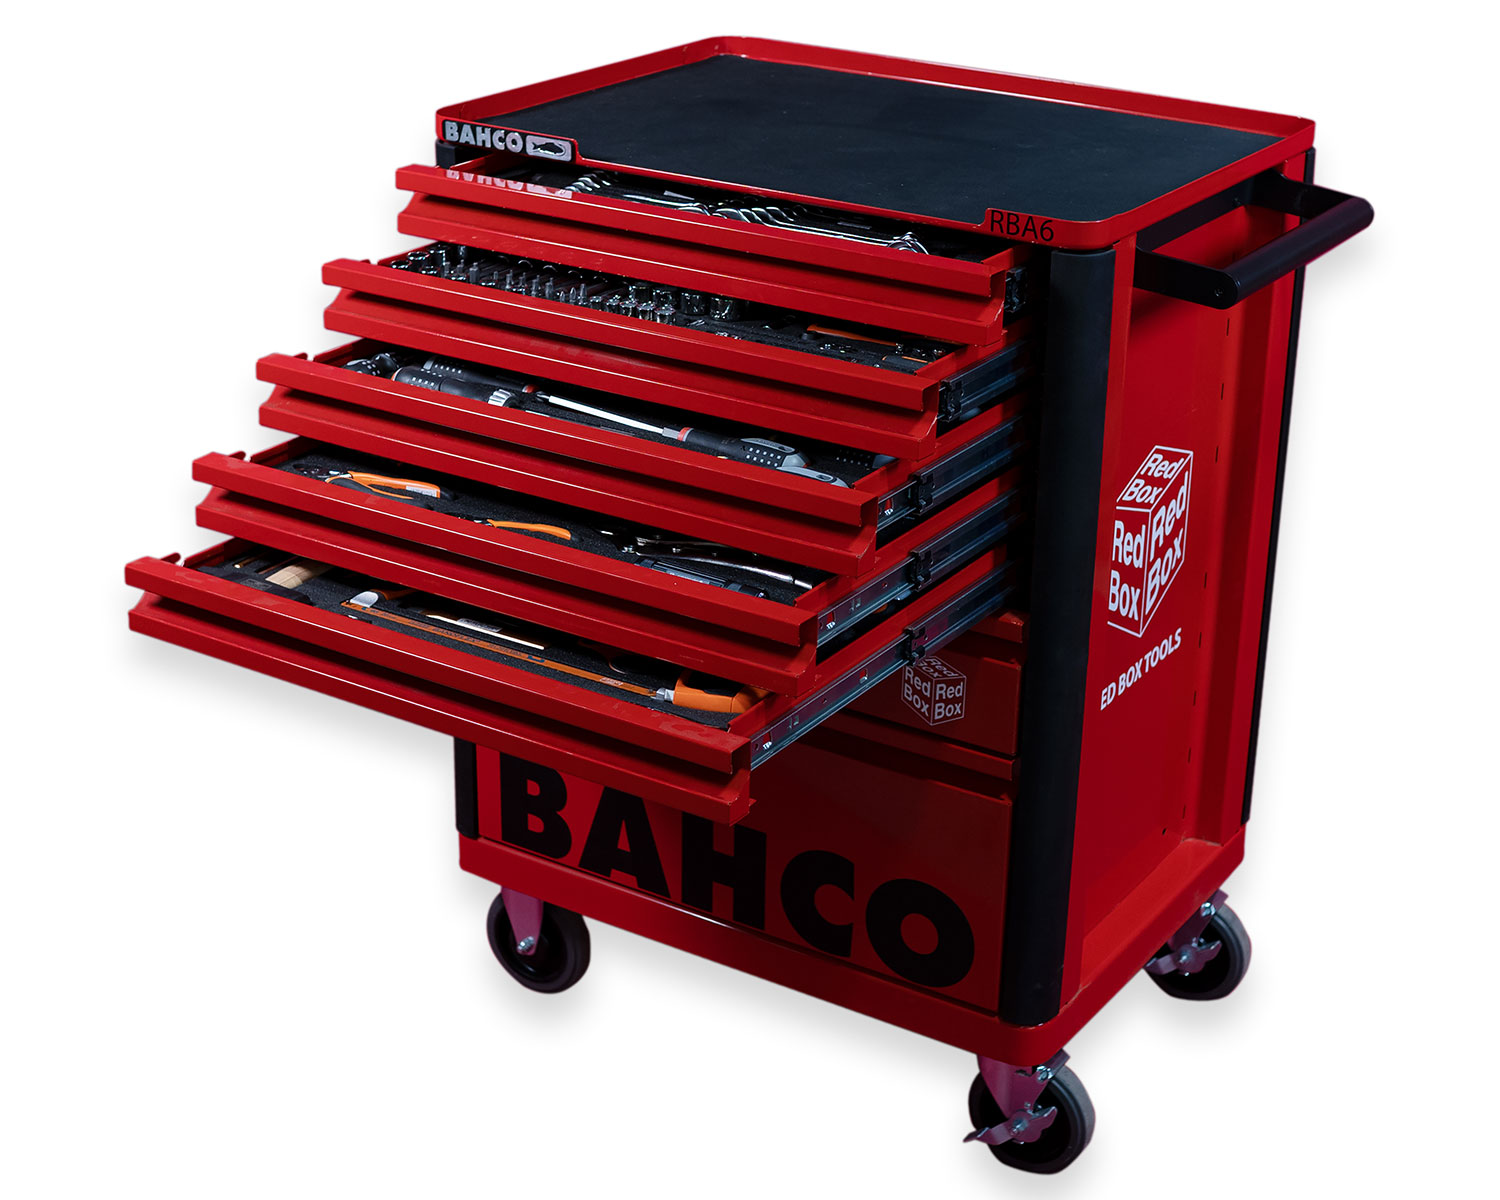 Tool Chests, Cabinets & Boxes